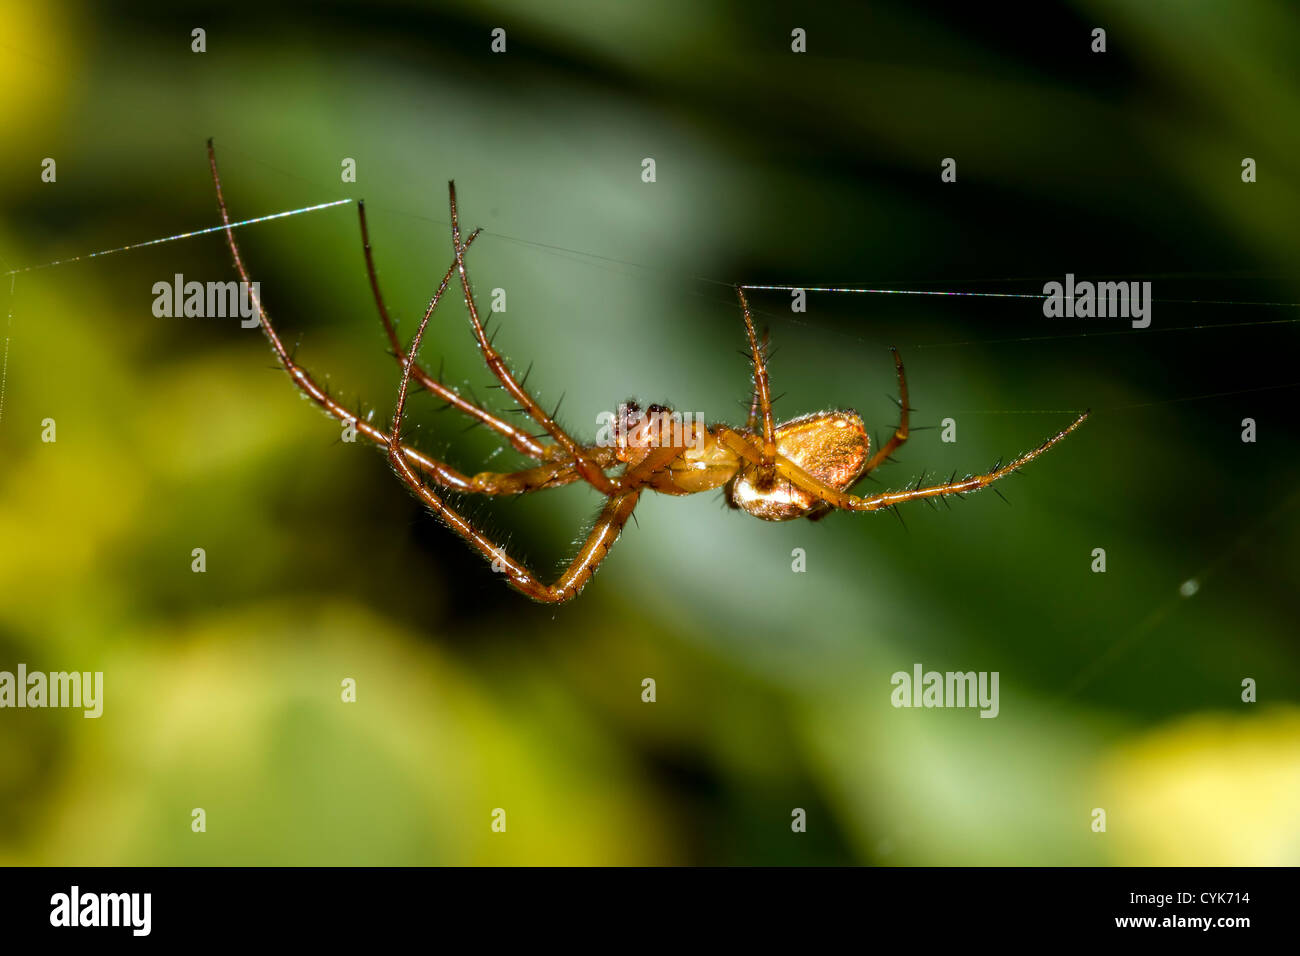 spider hanging upside down Stock Photo